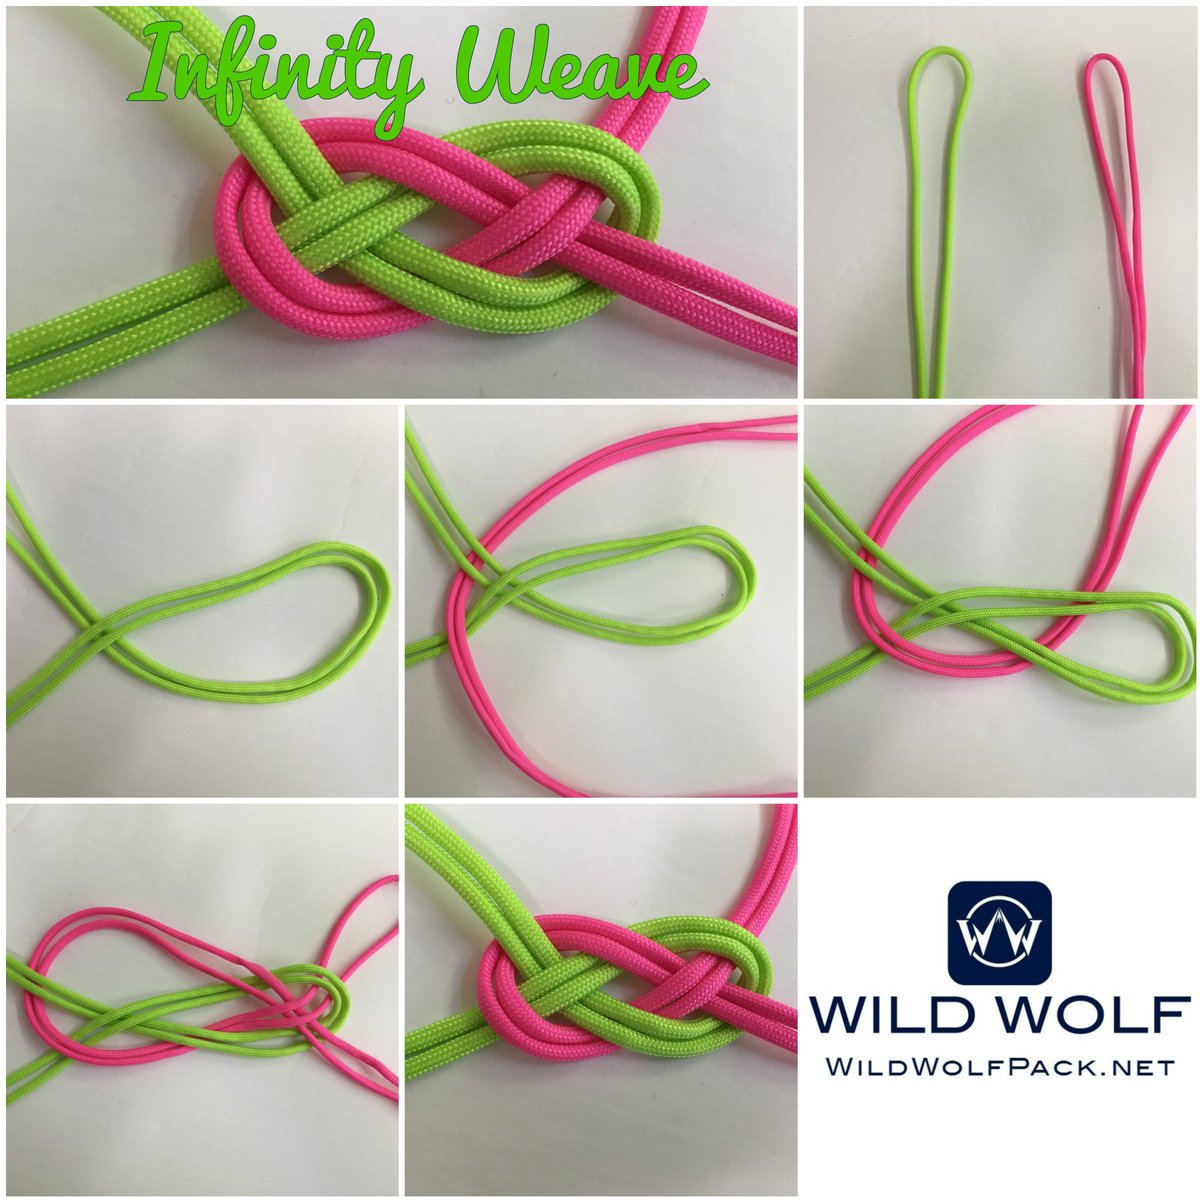 Paracord Infinity Knot - How to Instructions
buff.ly/2px5Zx3

#paracordknot #paracordprojects #paracordnecklace #wildwolfparacord